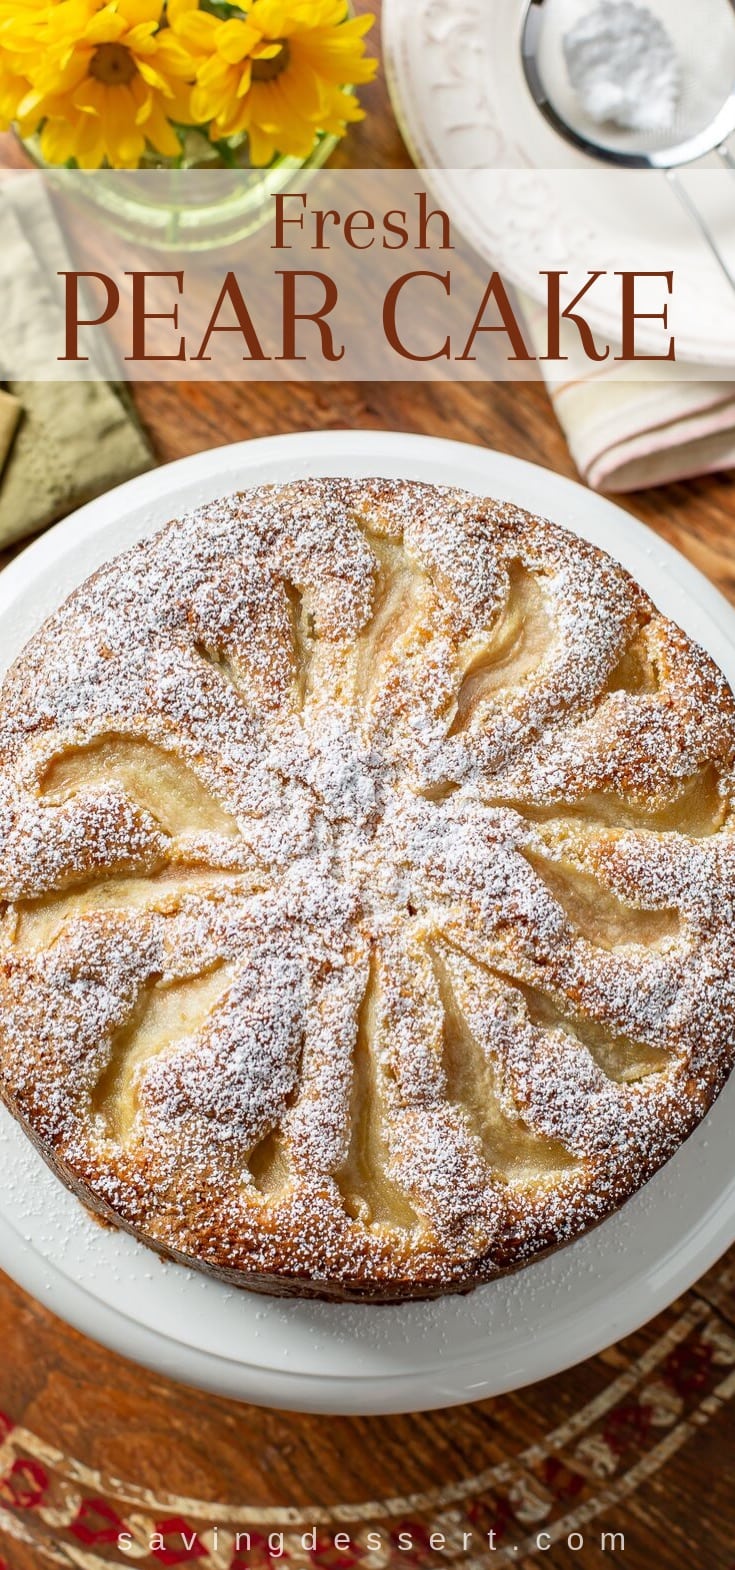 A fresh pear cake with sliced pears and powdered sugar on top